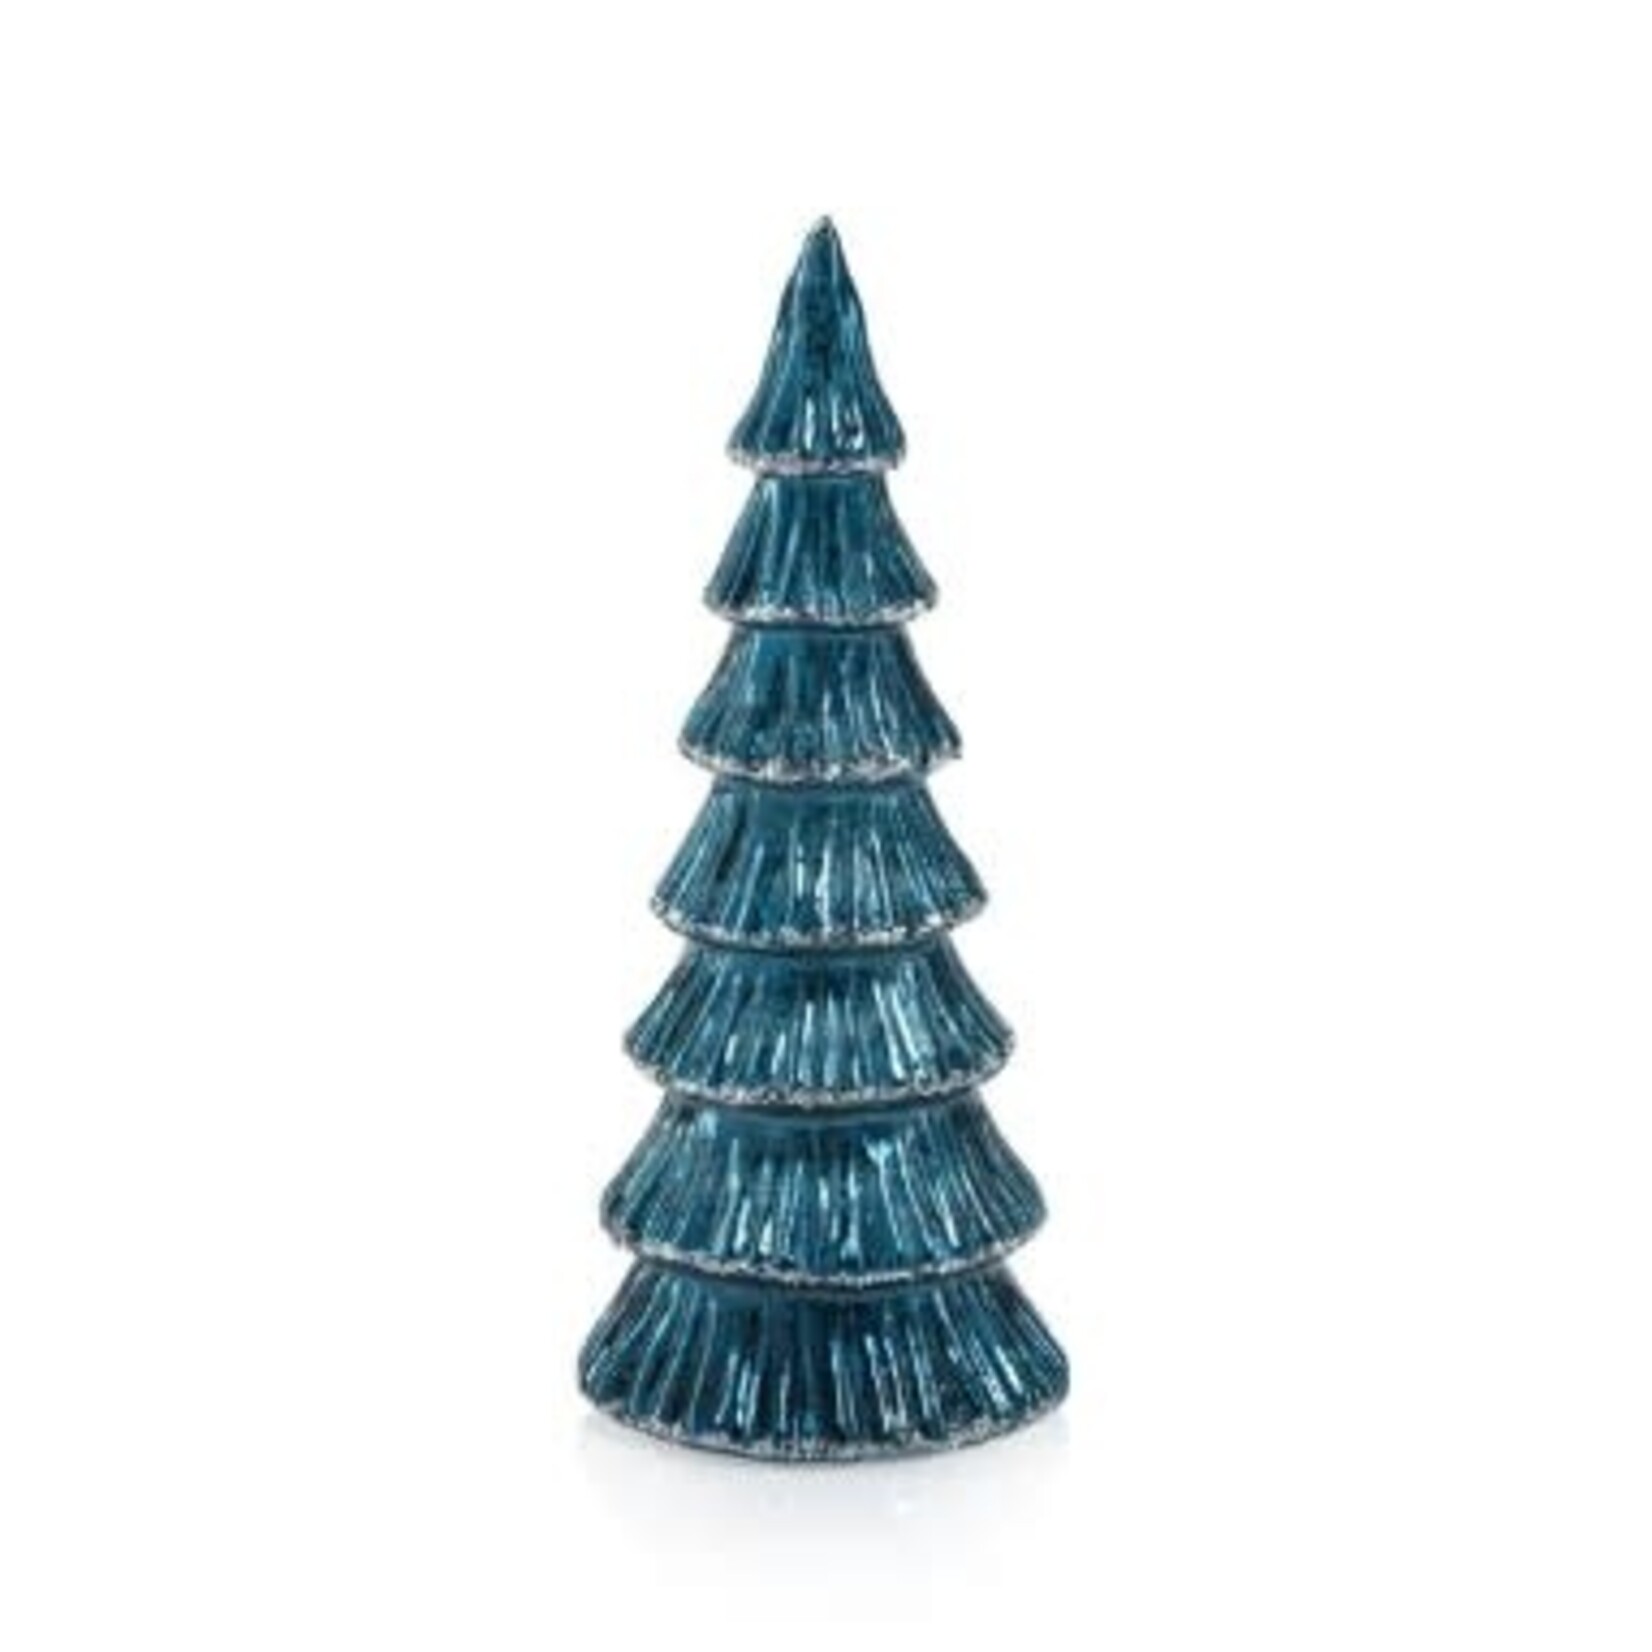 Zodax Verbier LED Glass Tree Blue with Silver Trim